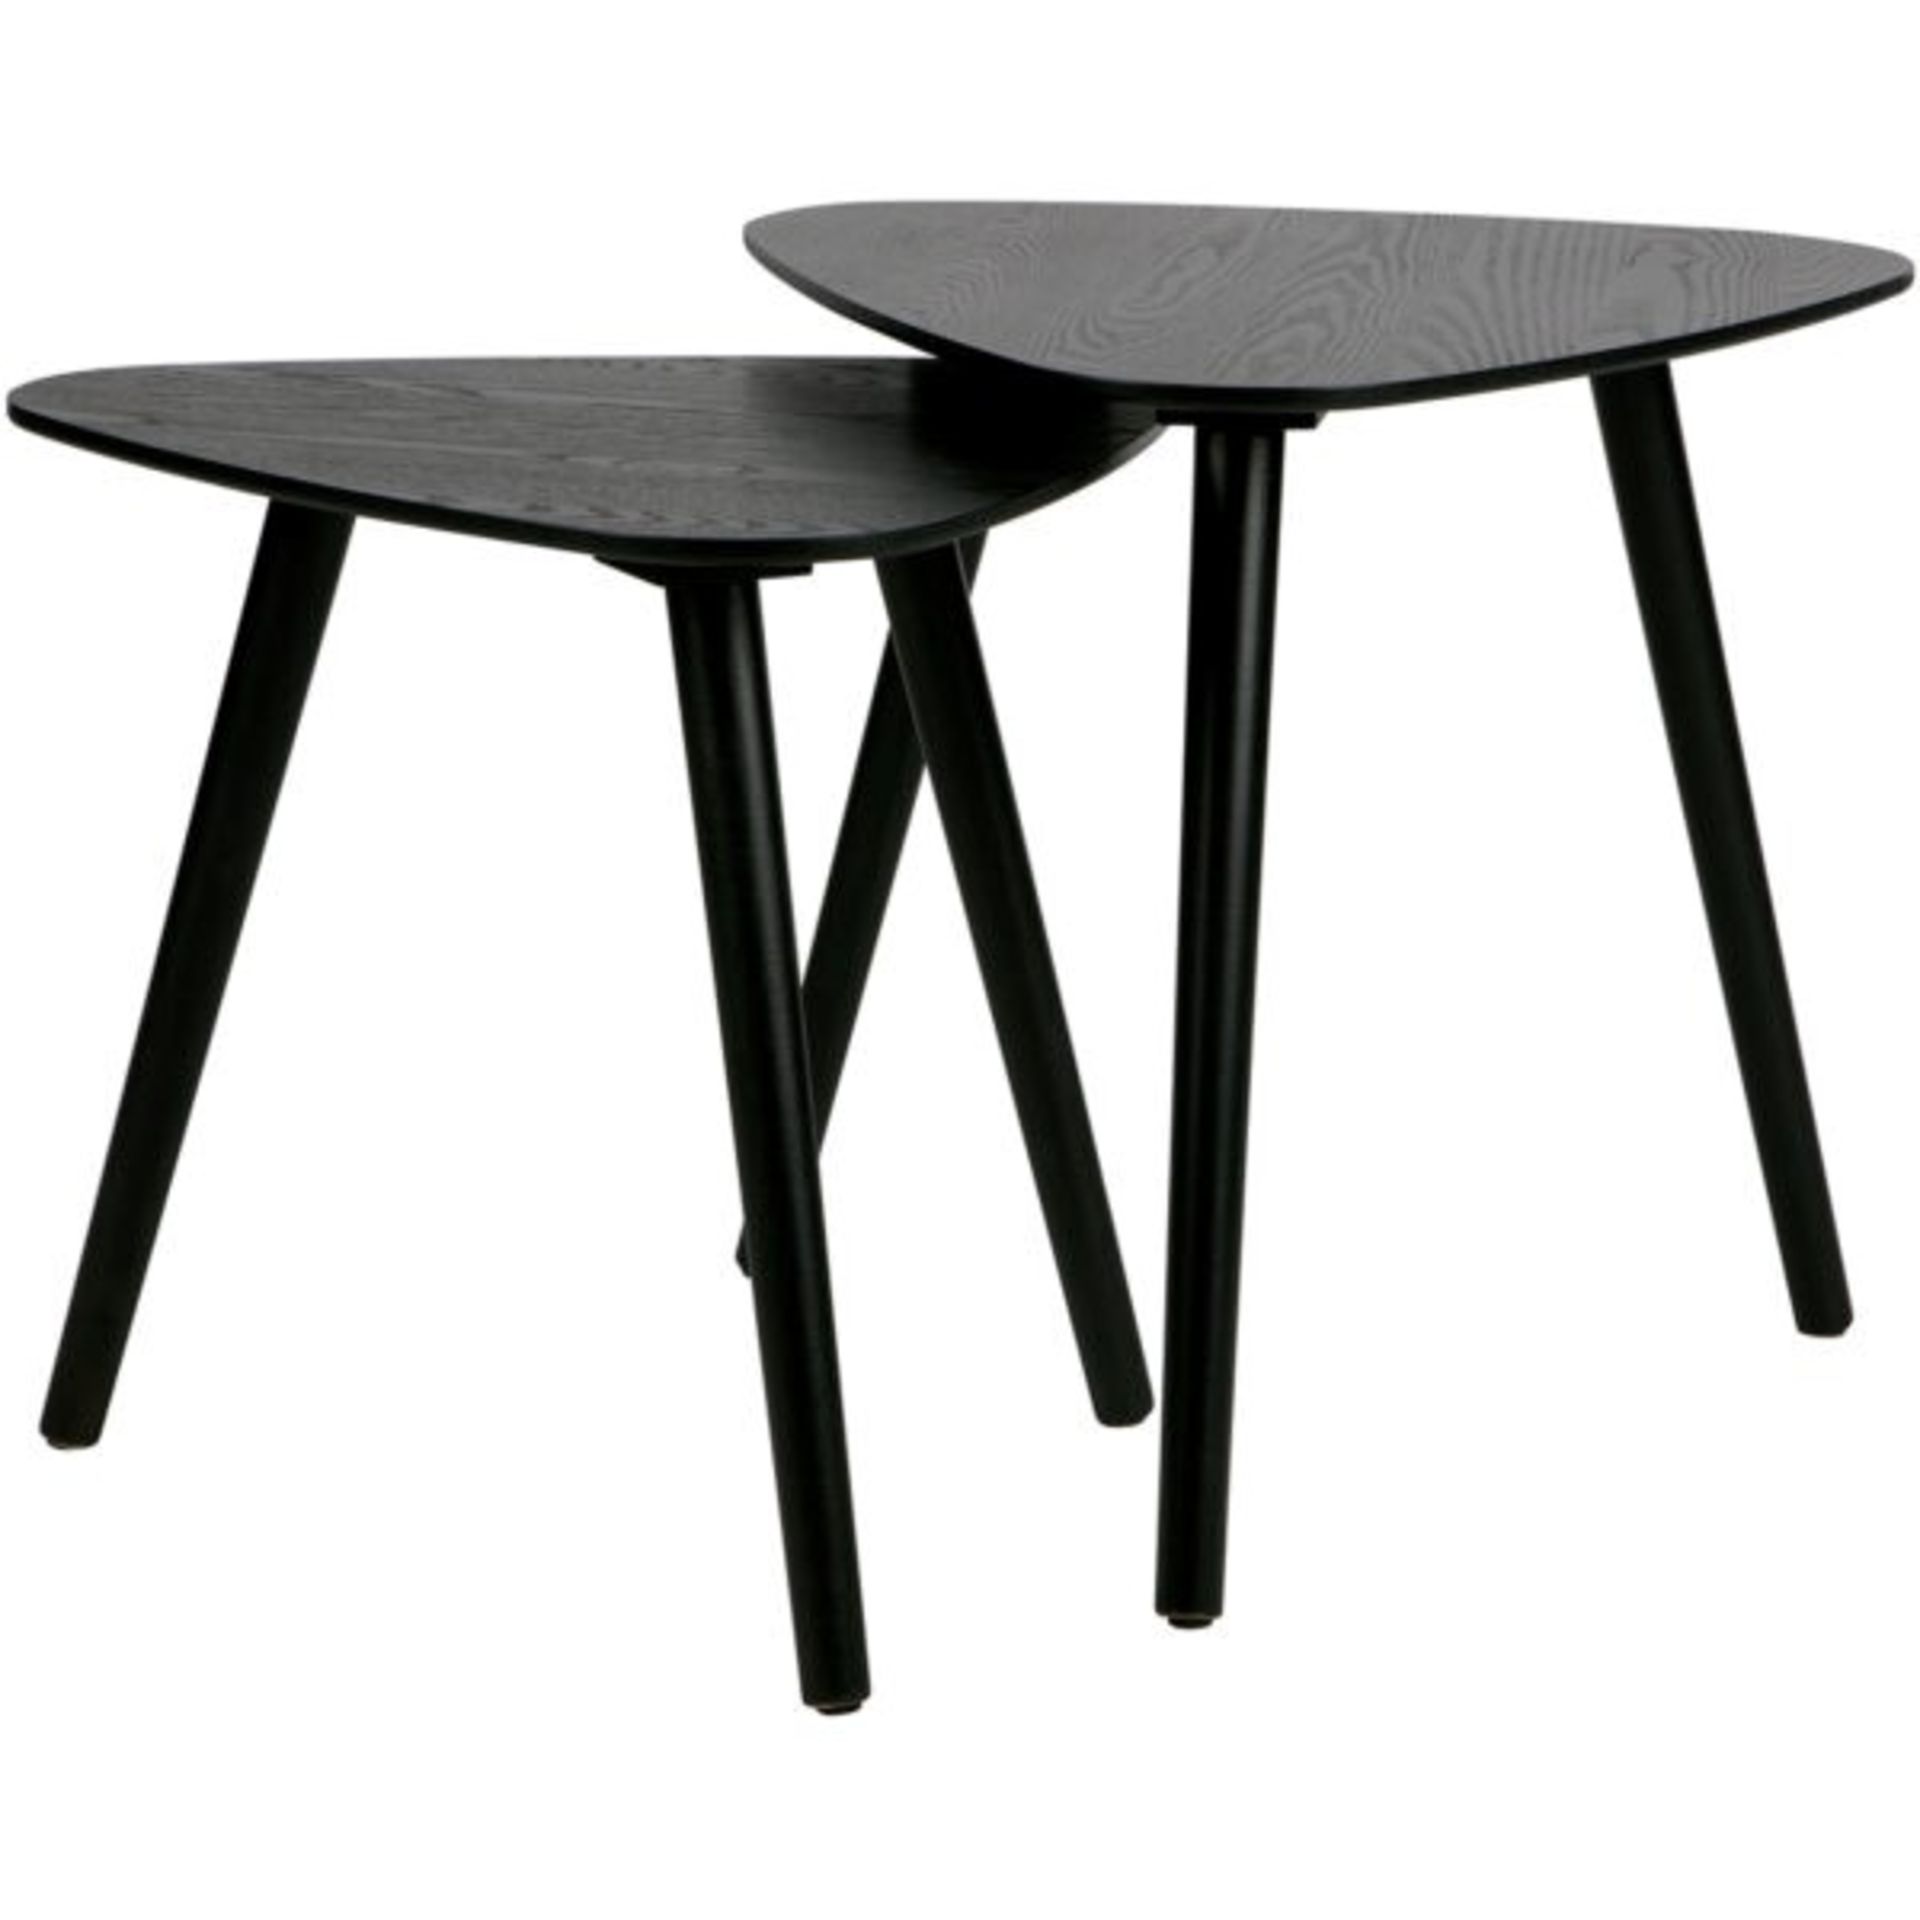 Set Of 2 x NILA Contemporary Wooden Side Tables In BLACK - Brand New Boxed Stock - CL508 - 715 / F4 - Image 5 of 6